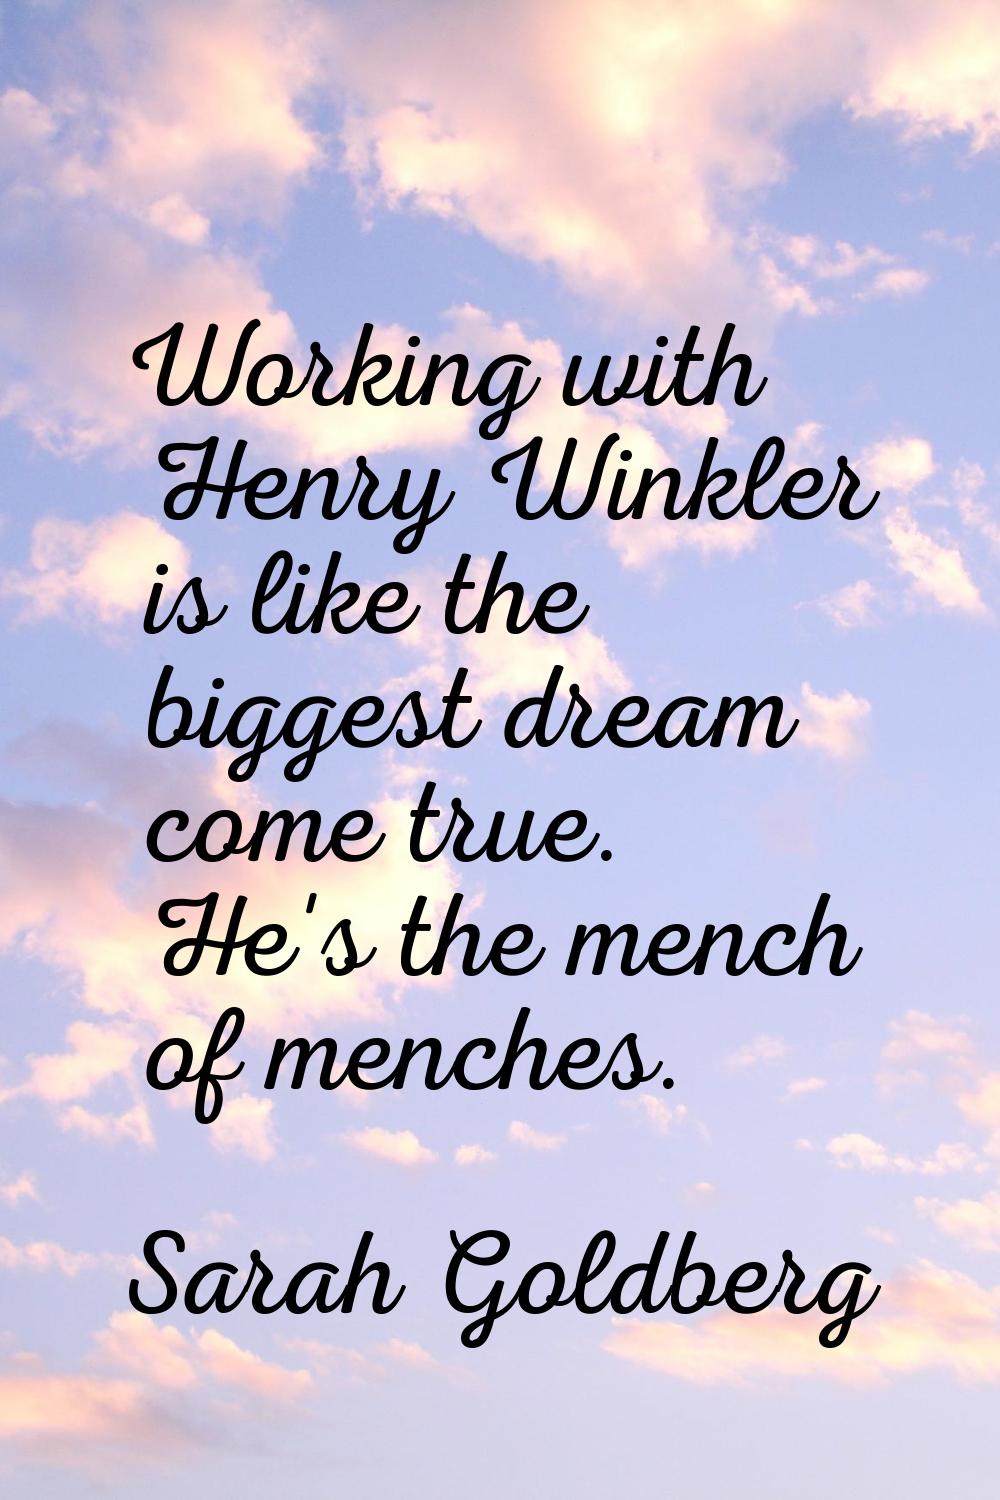 Working with Henry Winkler is like the biggest dream come true. He's the mench of menches.